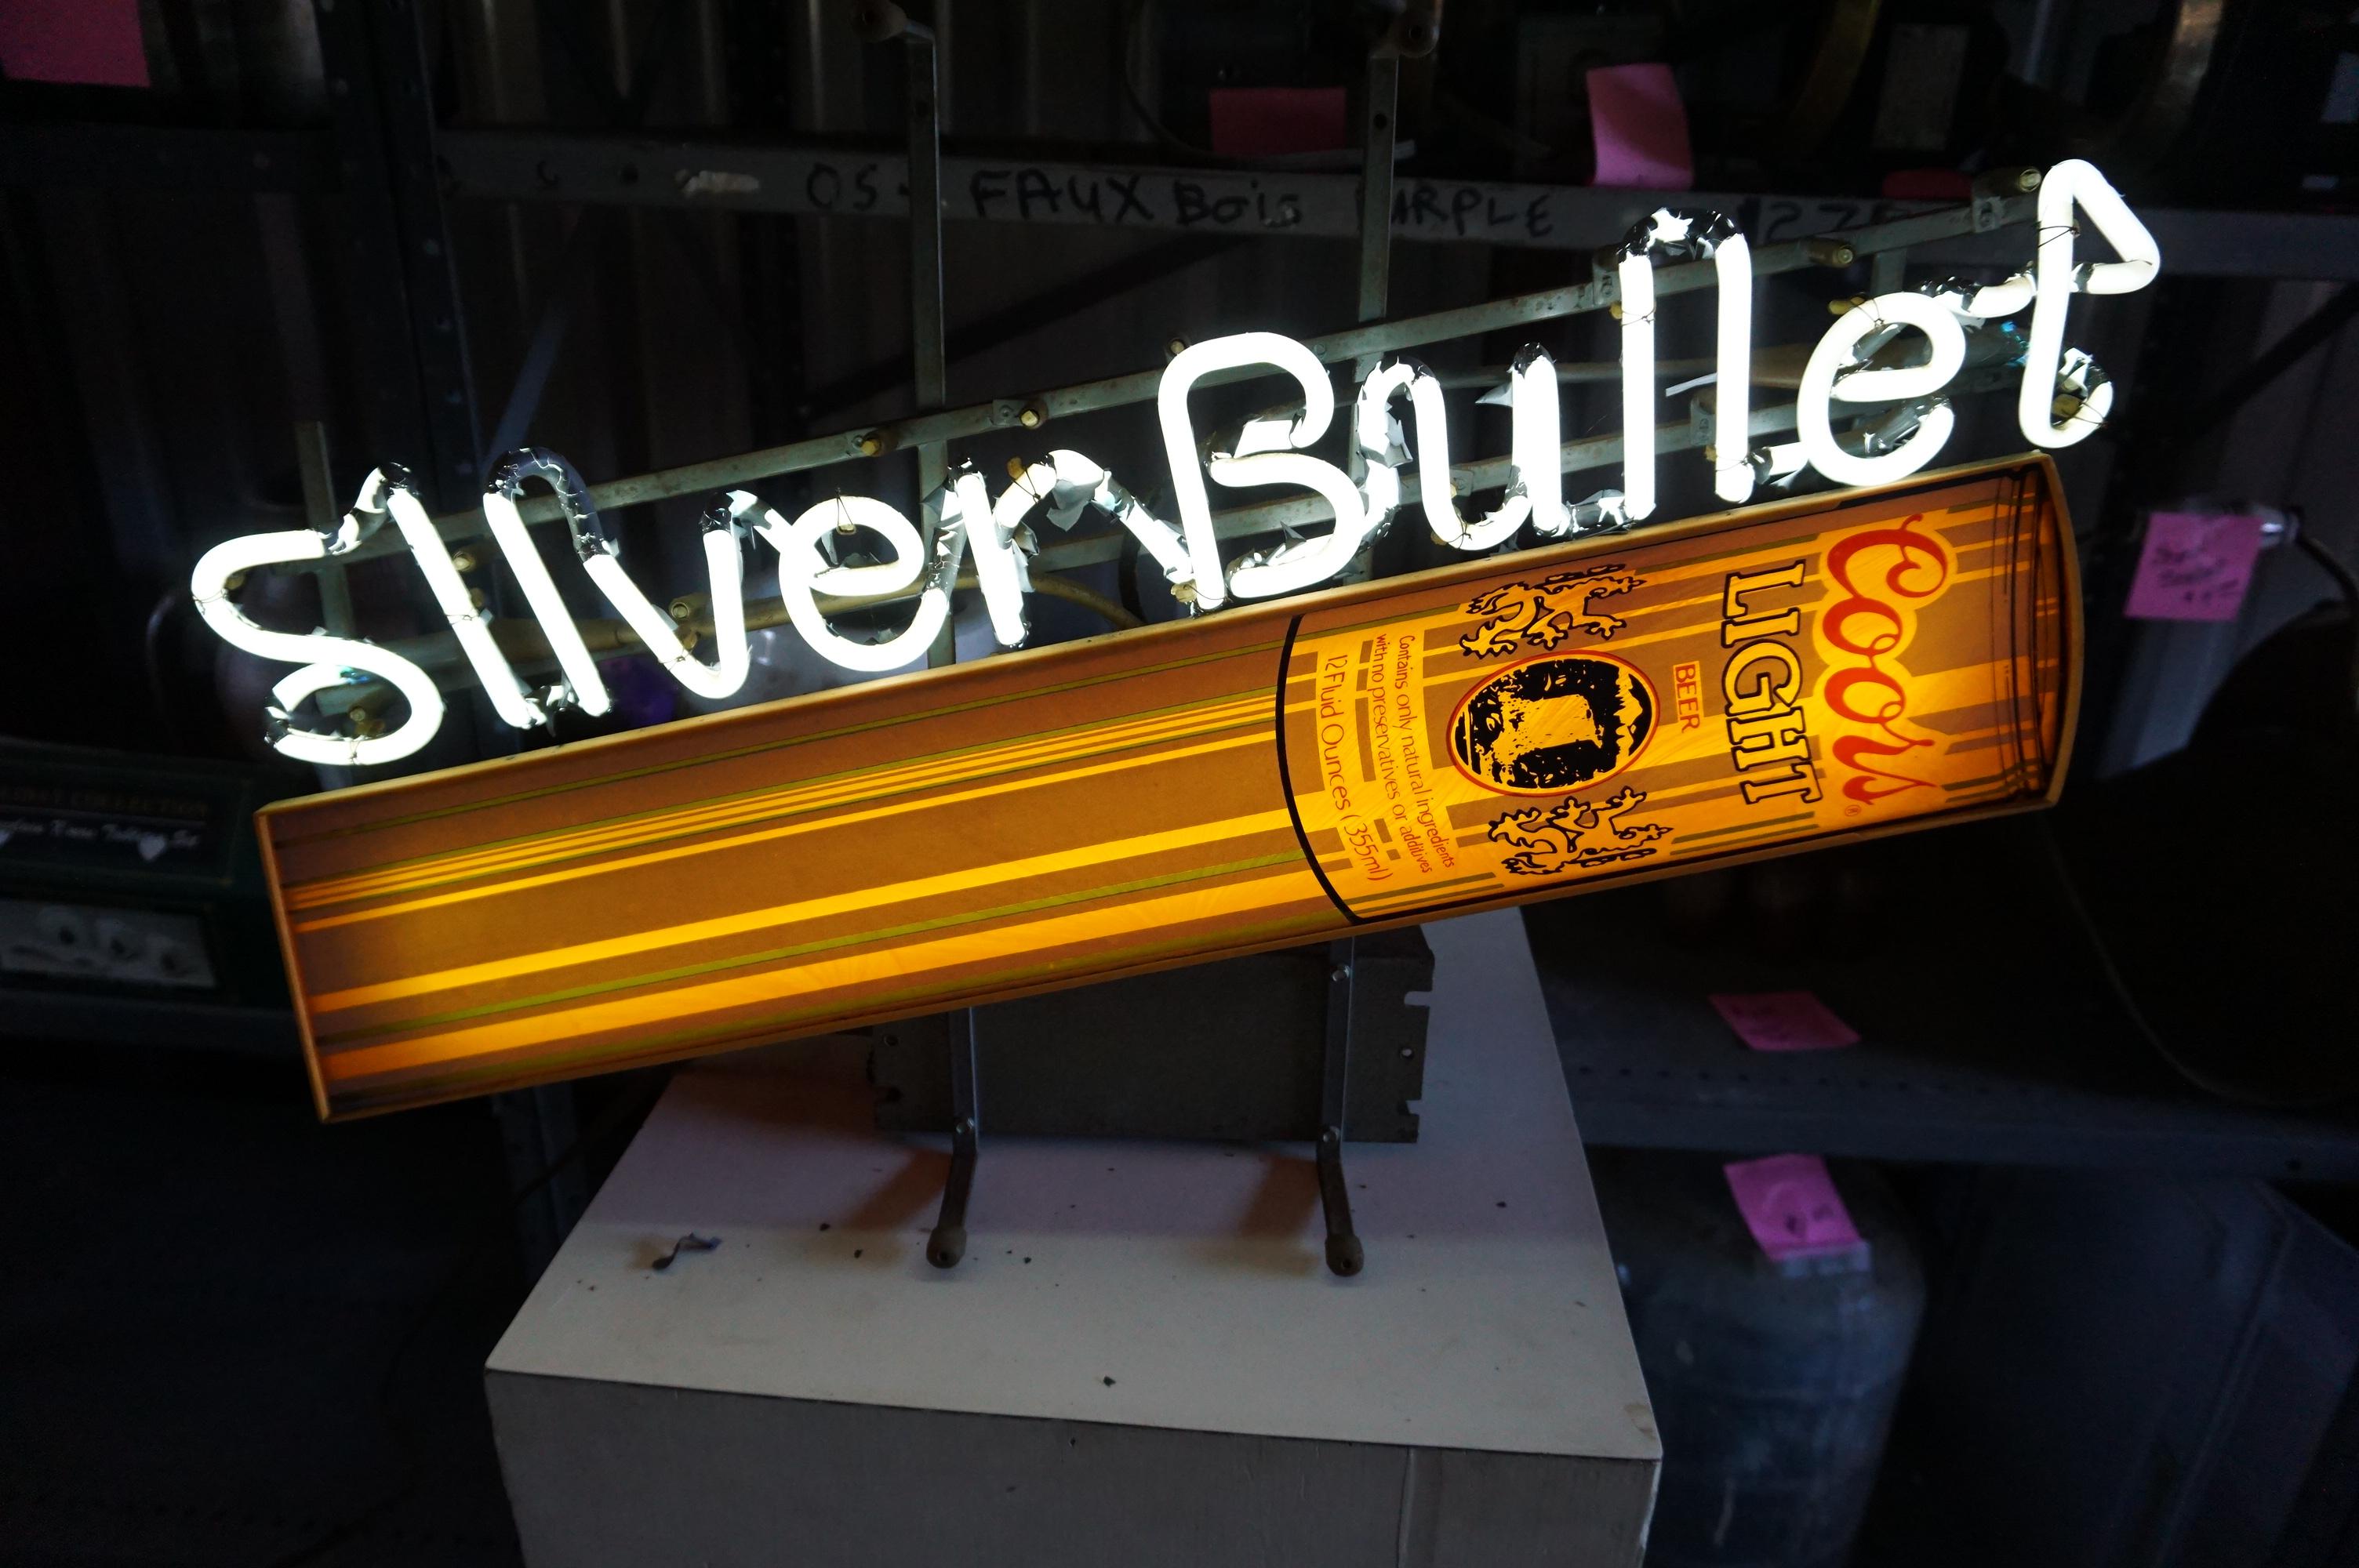 Silver Bullet Working Neon Sign, Older Model, Dirty from storage, NO SHIPPING! PICK-UP ONLY!